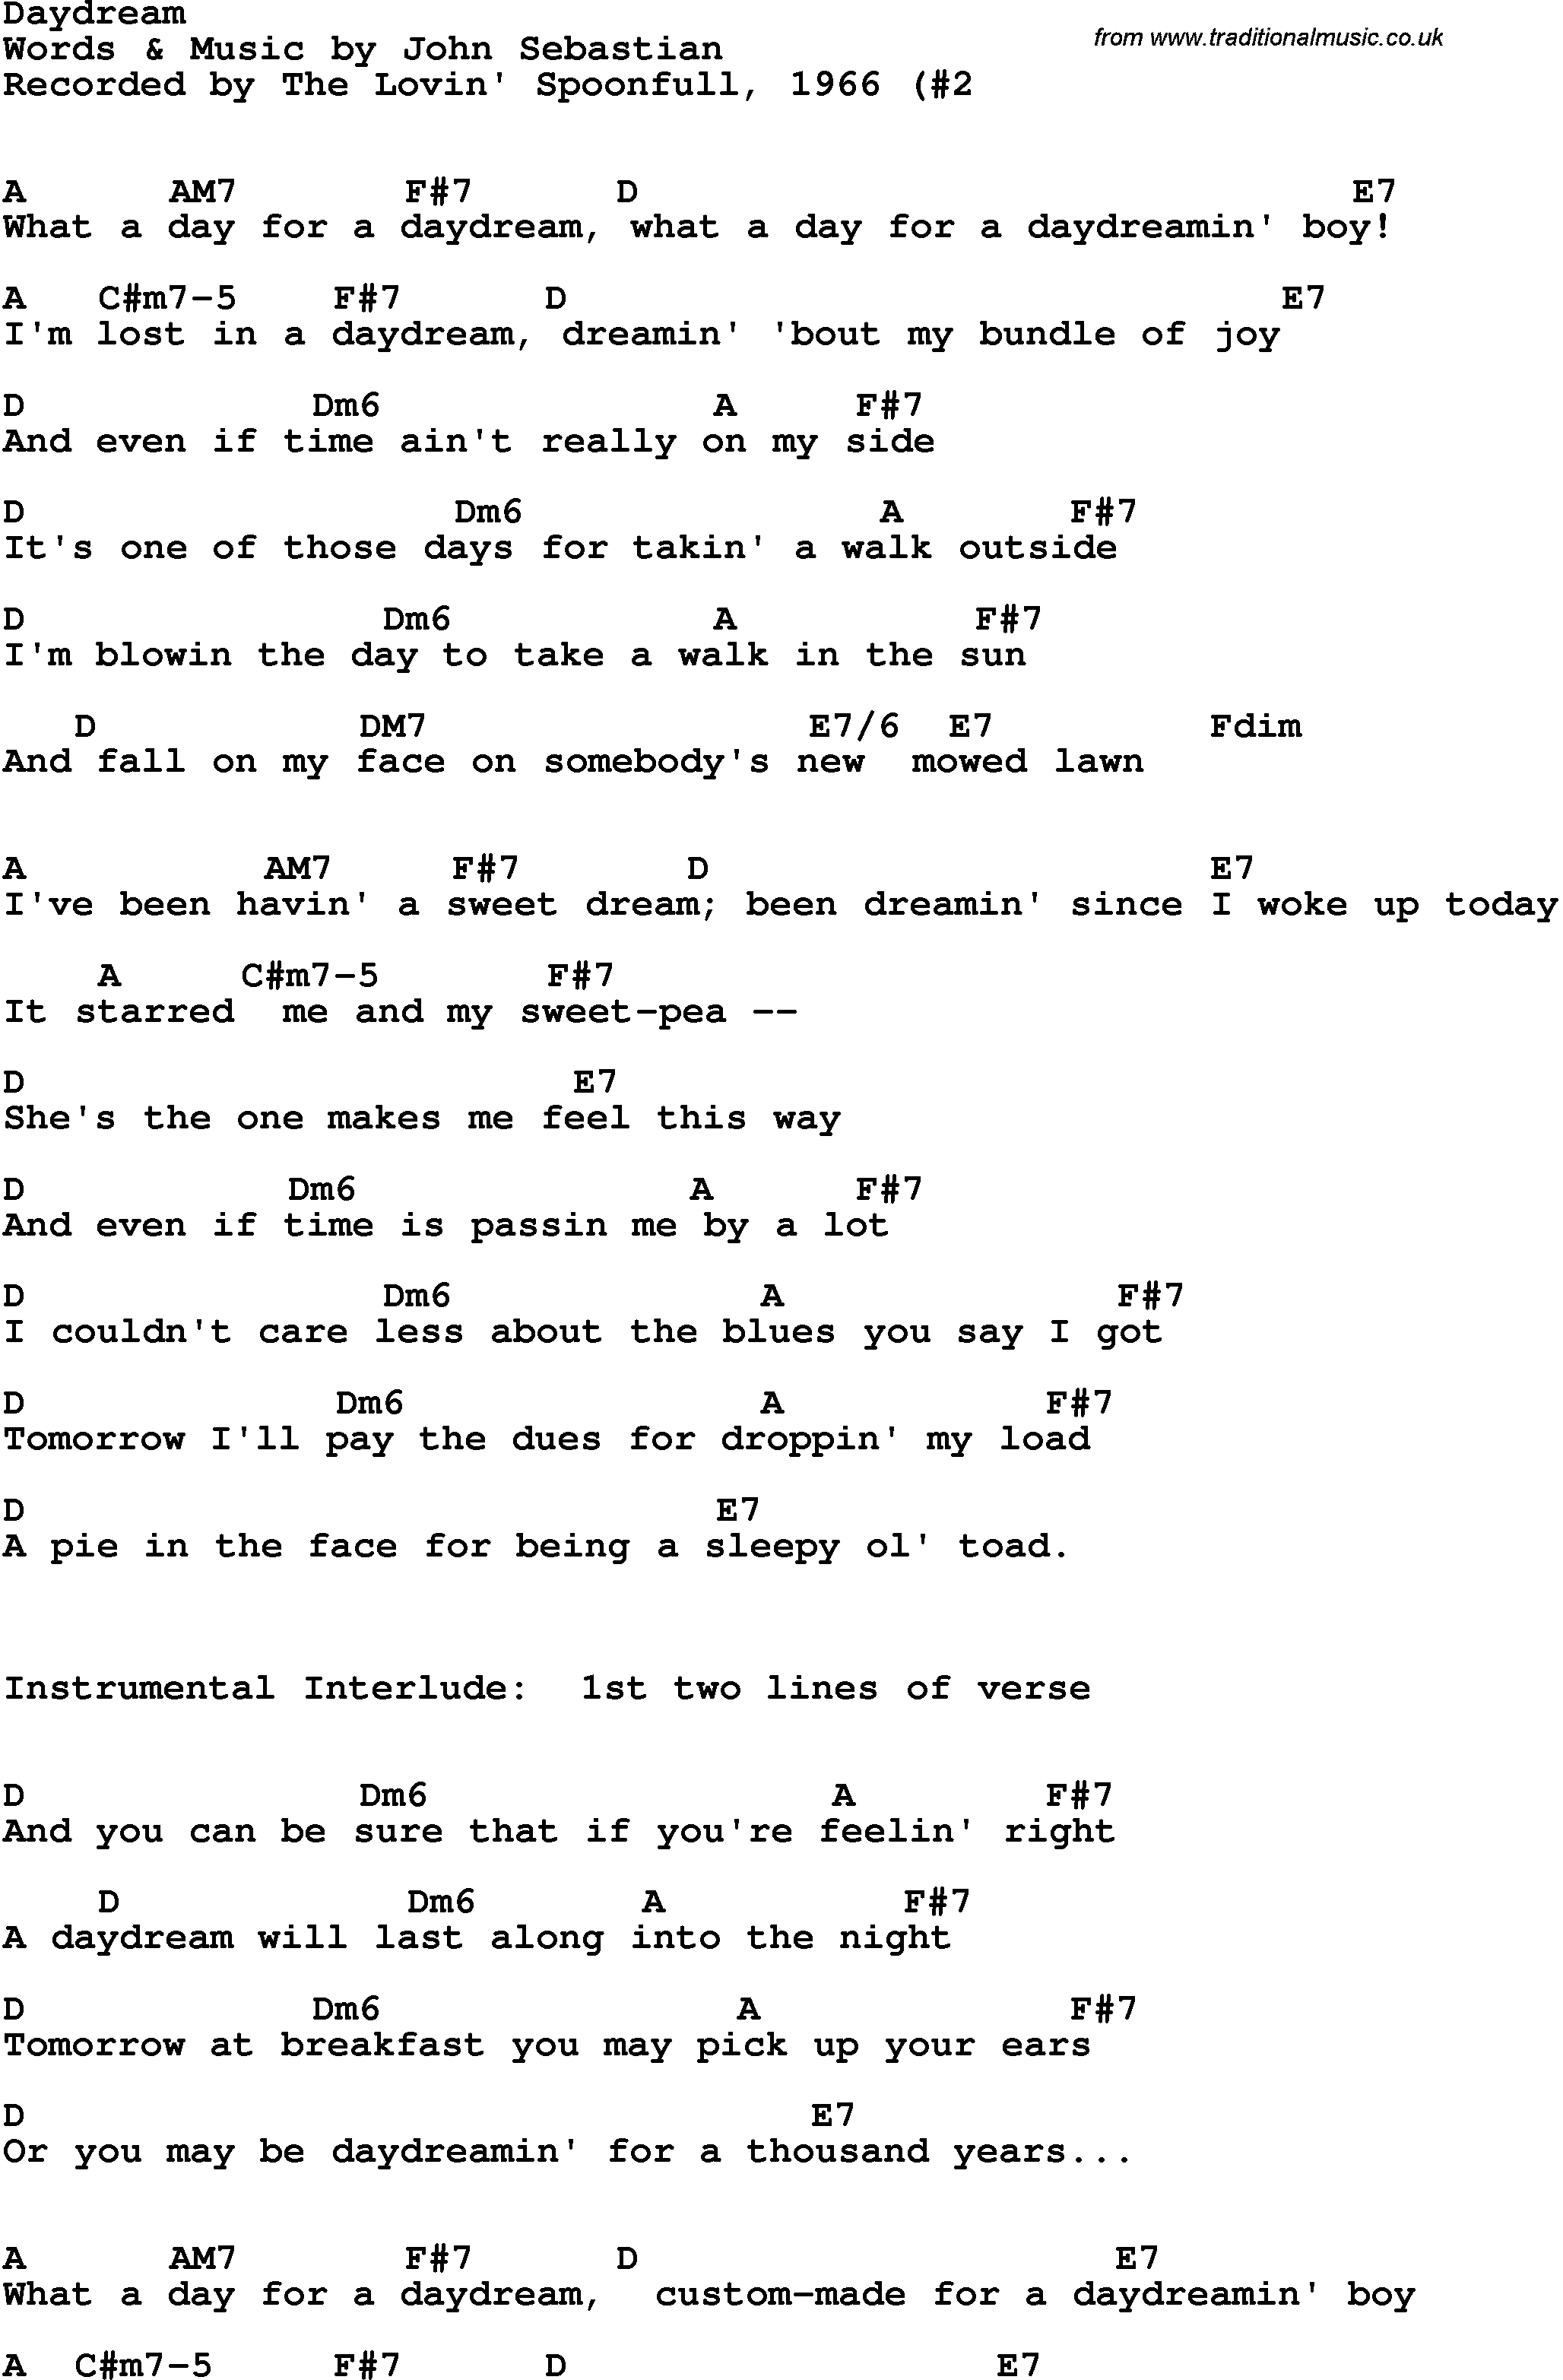 Song Lyrics with guitar chords for Daydream - The Lovin' Spoonful, 1966